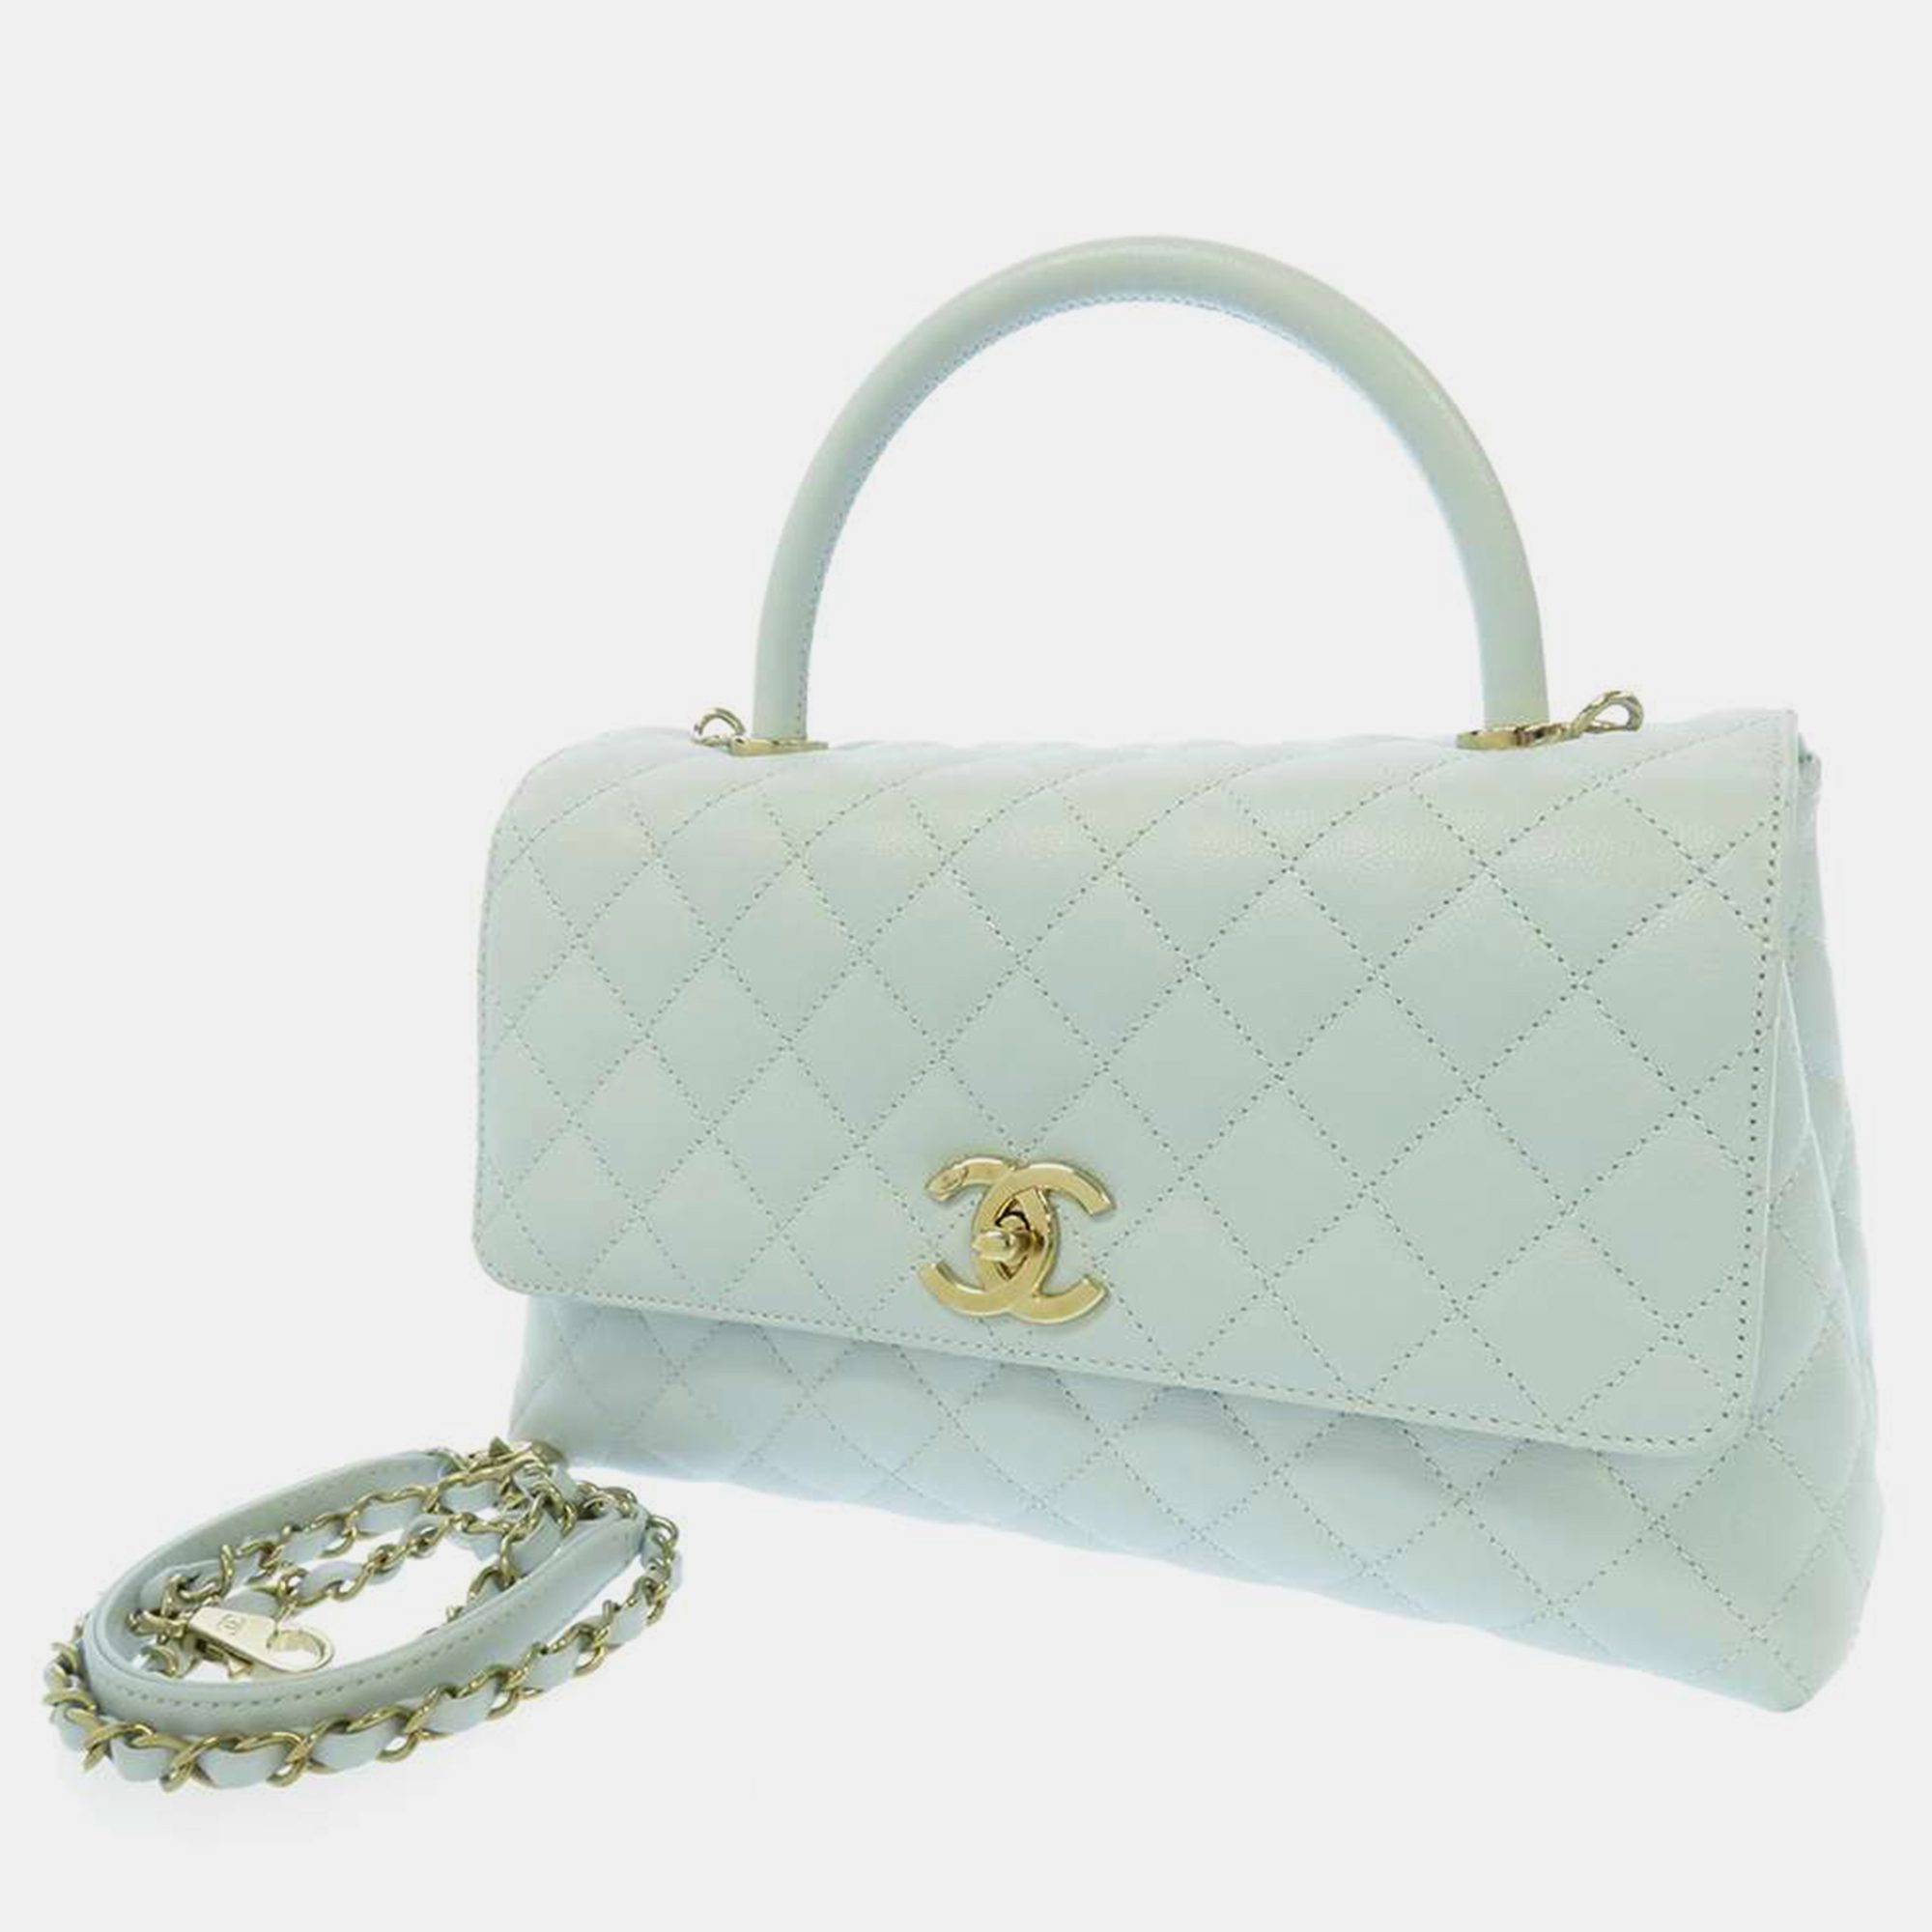 Chanel Blue Leather Small Coco Top Handle Bag